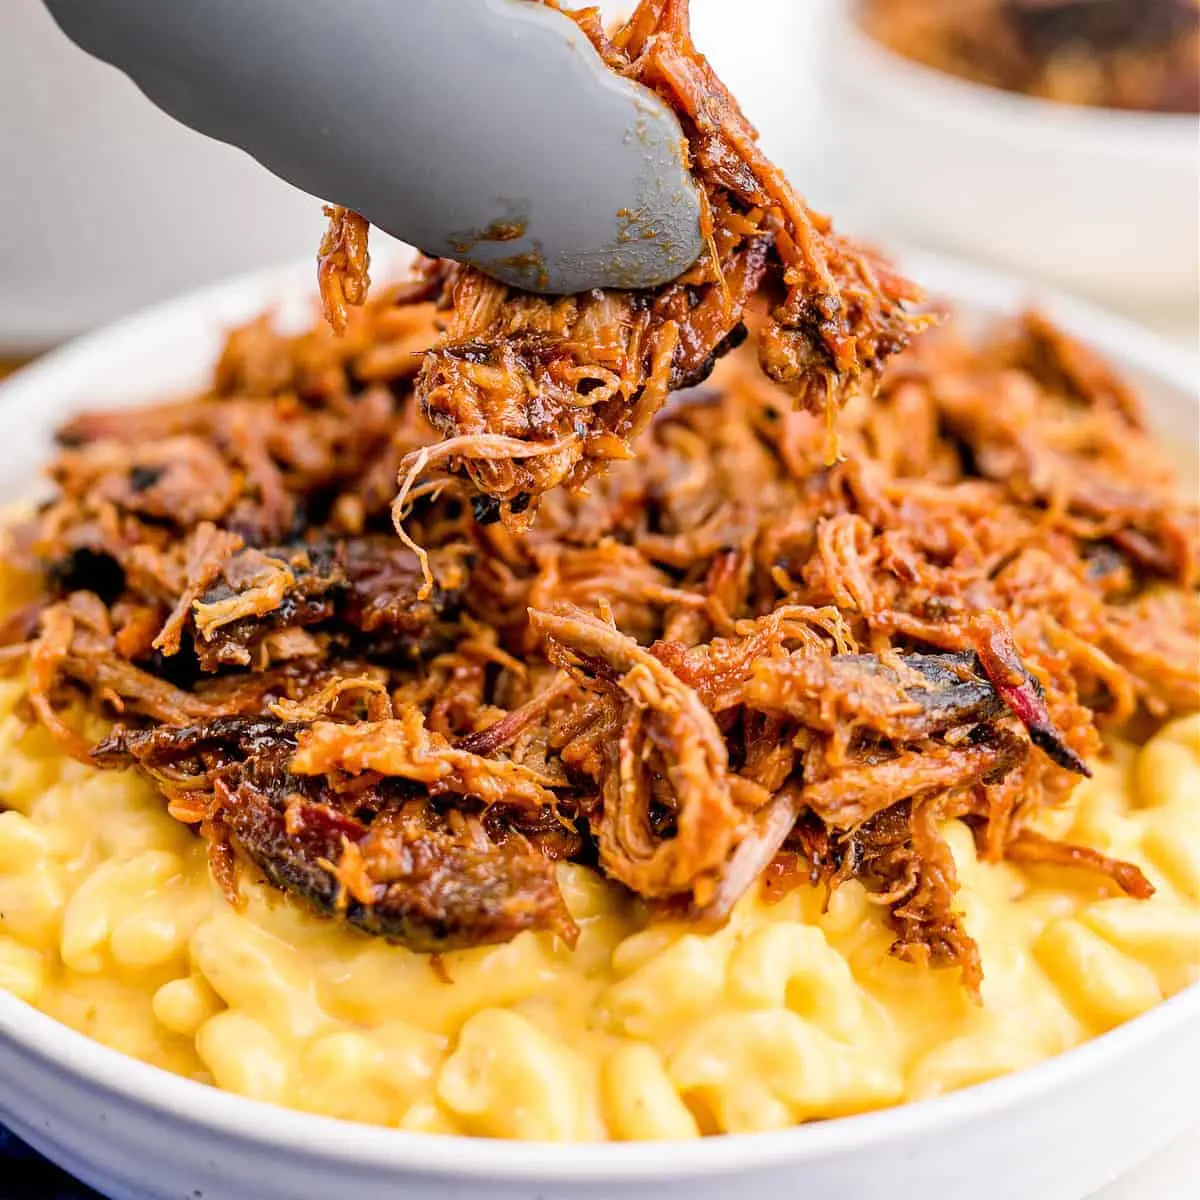 smoked pulled pork mac and cheese - What cheese goes beat with pulled pork